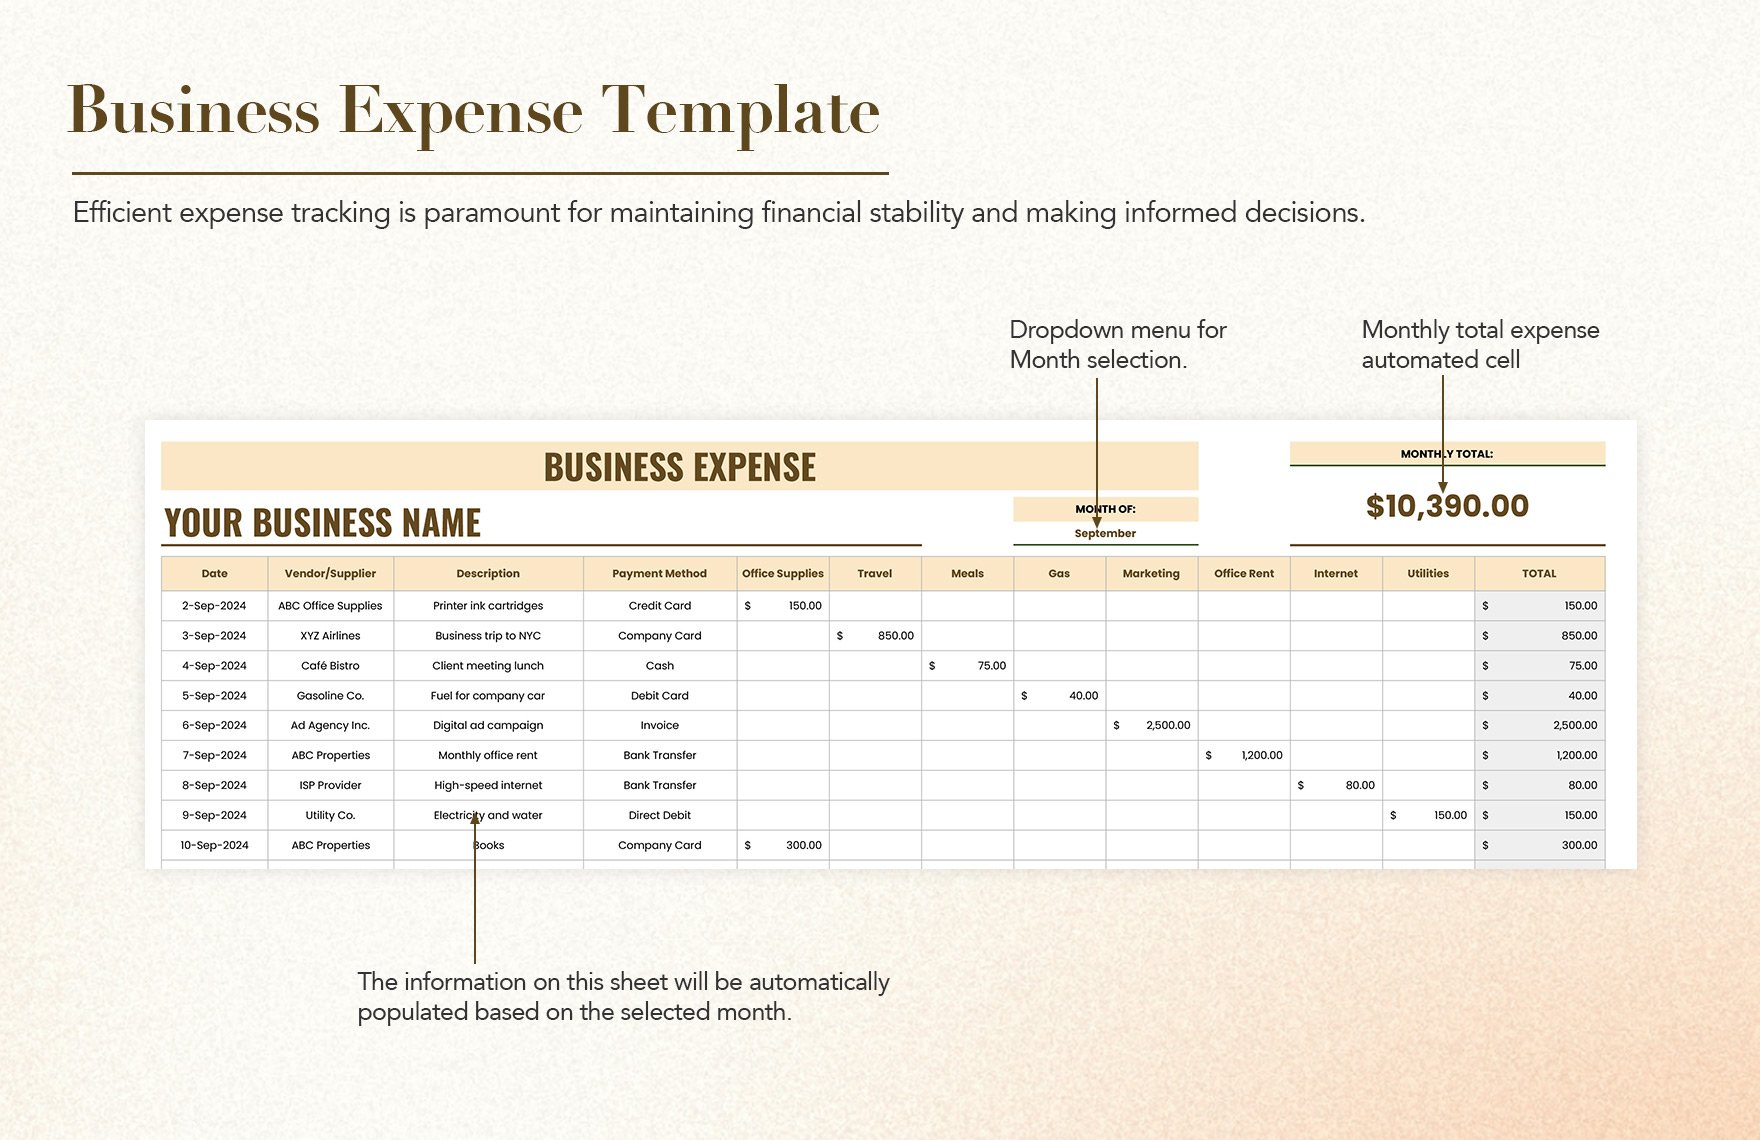 Business Expense Template